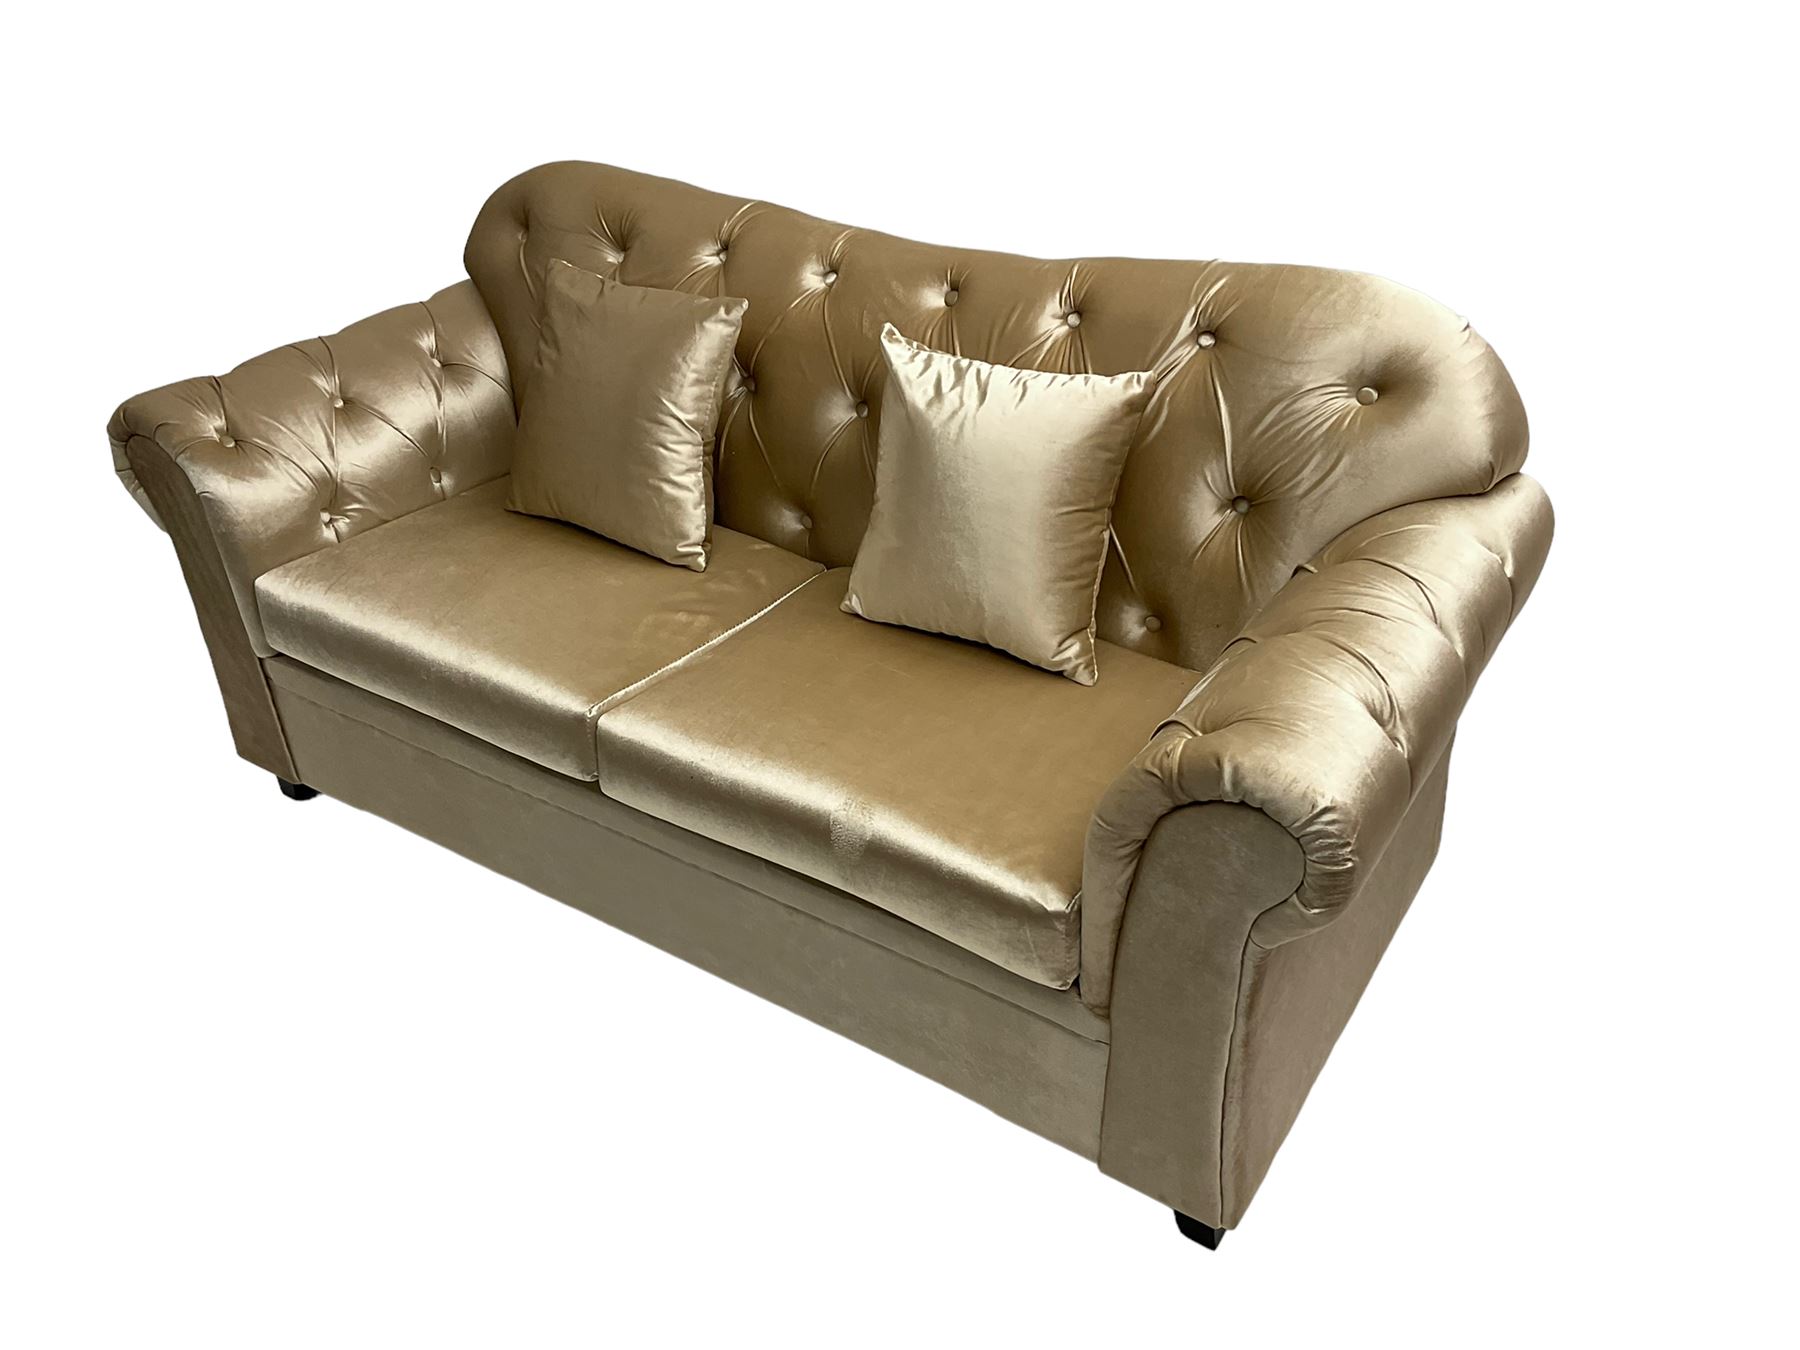 Chesterfield shaped two seat sofa - Image 4 of 6